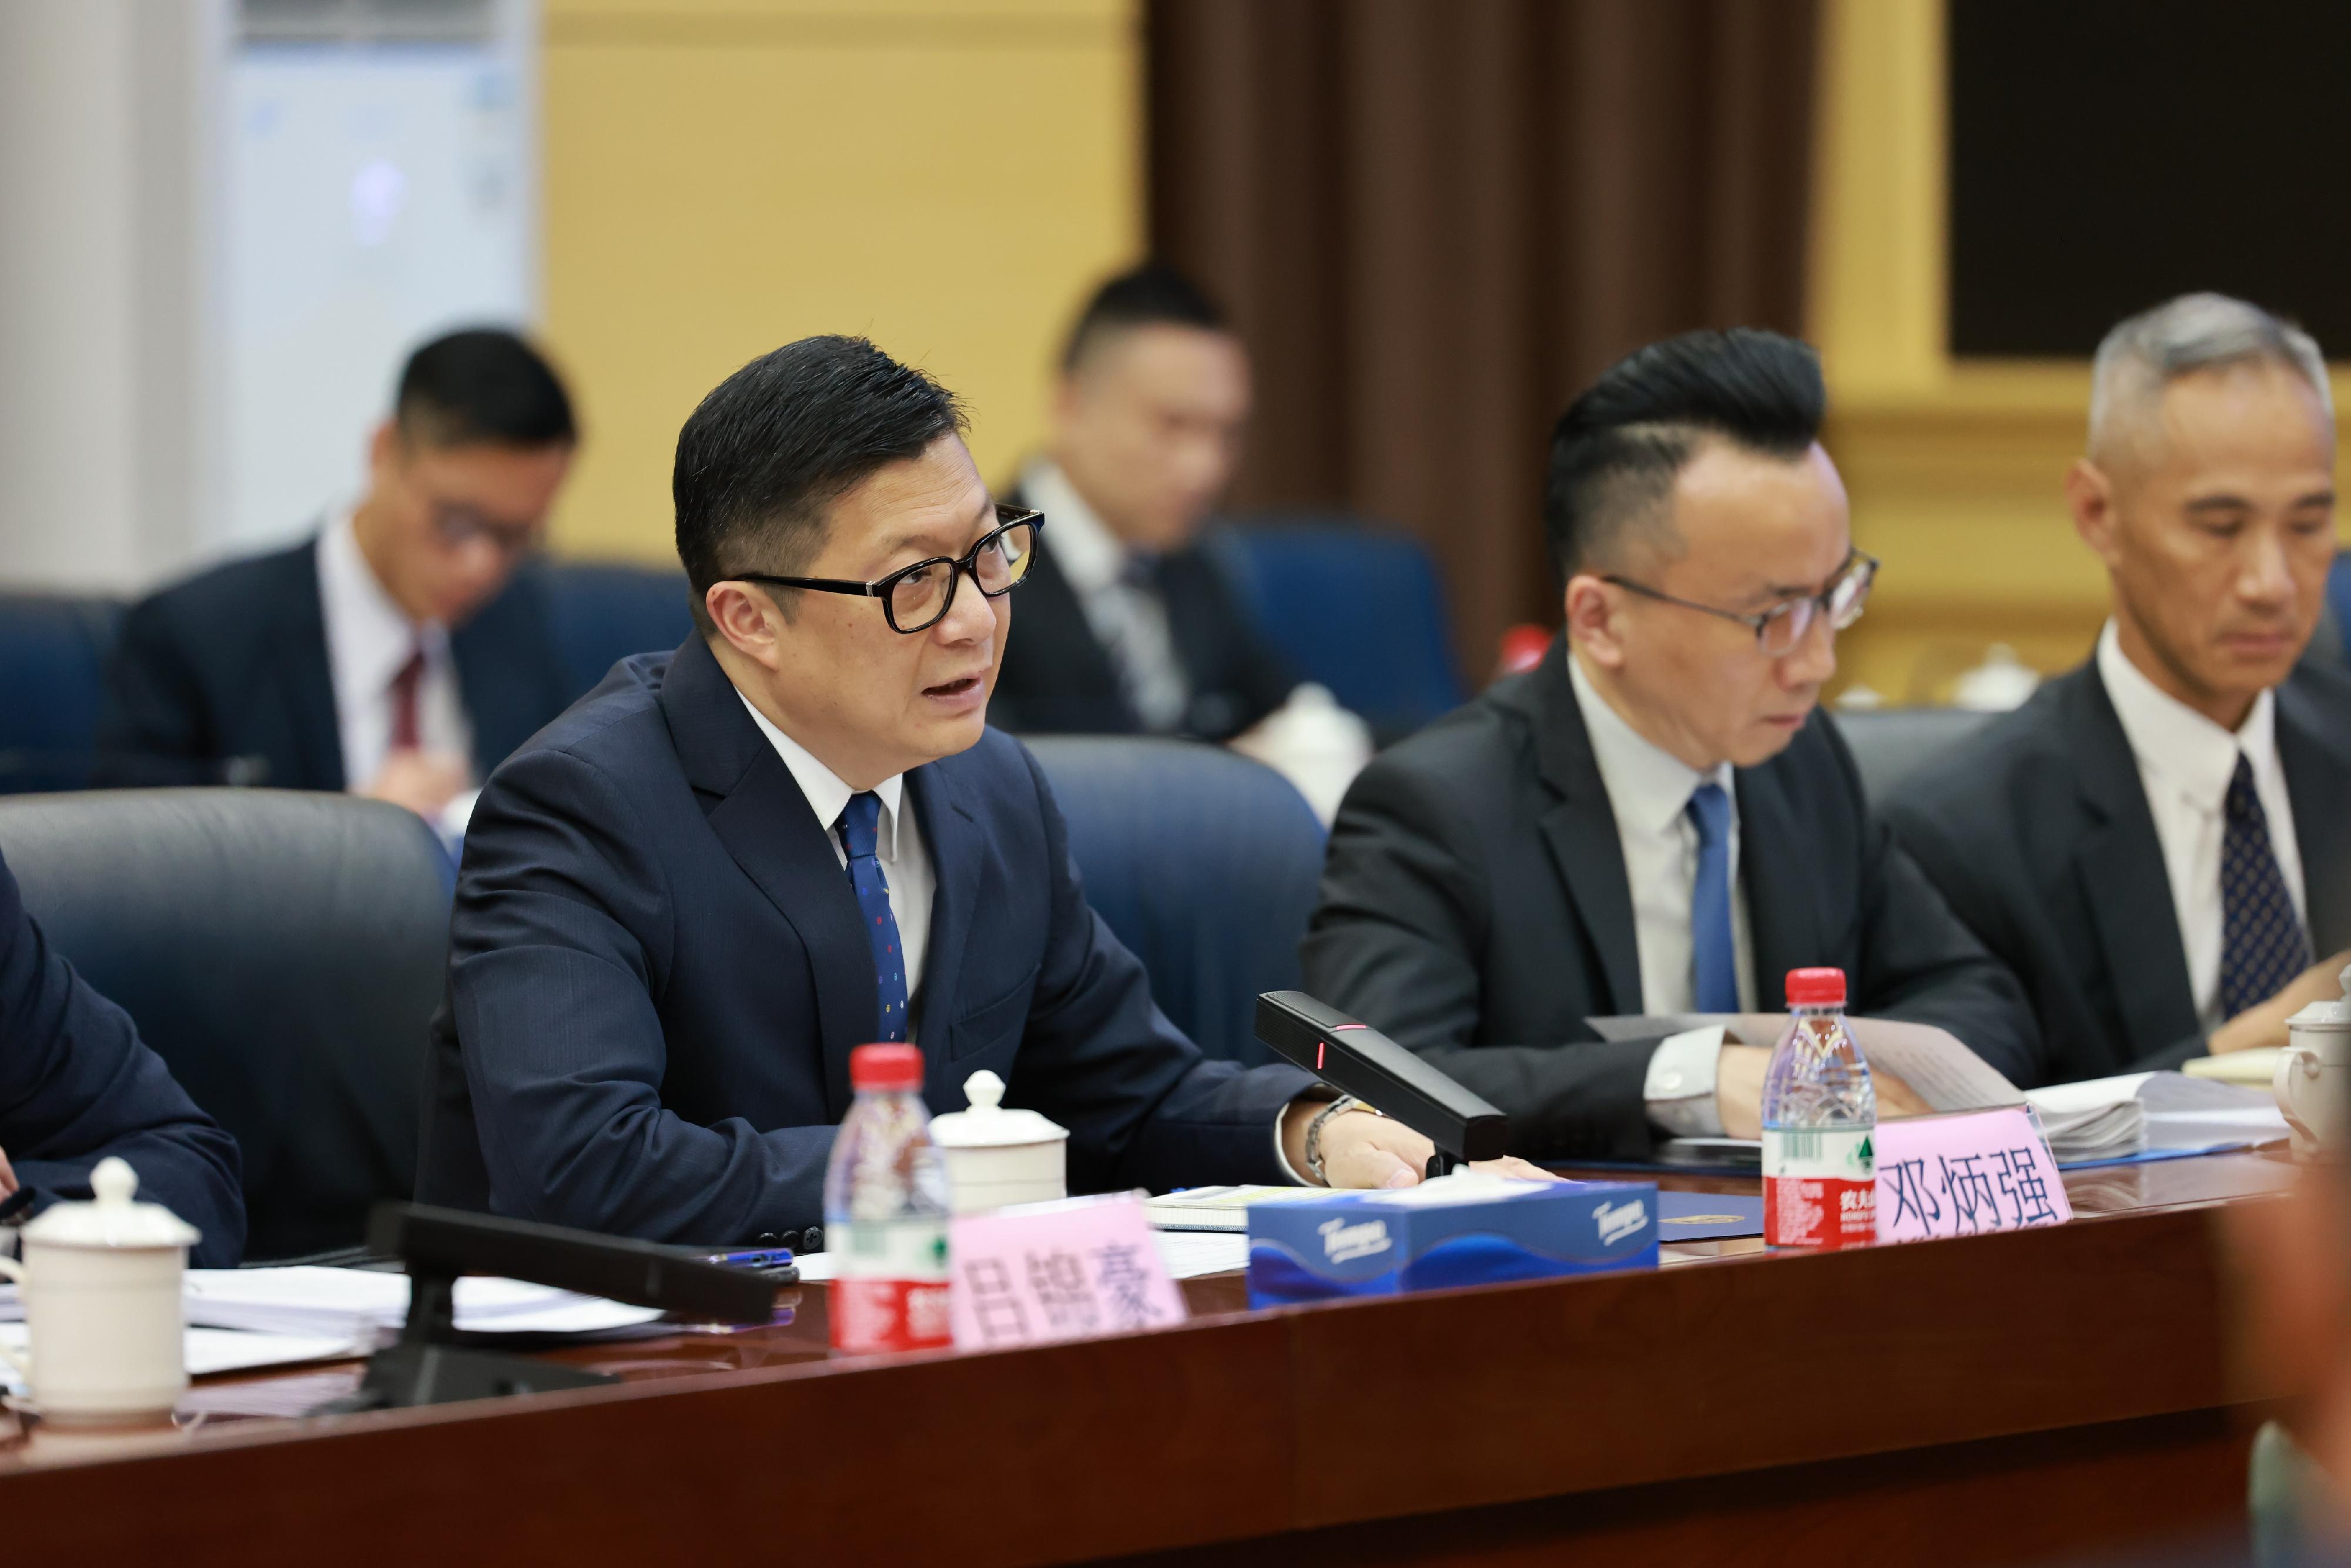 The Secretary for Security, Mr Tang Ping-keung, continued his visit to the Guangdong-Hong Kong-Macao Greater Bay Area today (May 25). Photo shows Mr Tang calling on Huizhou Municipal Public Security Bureau in Huizhou.